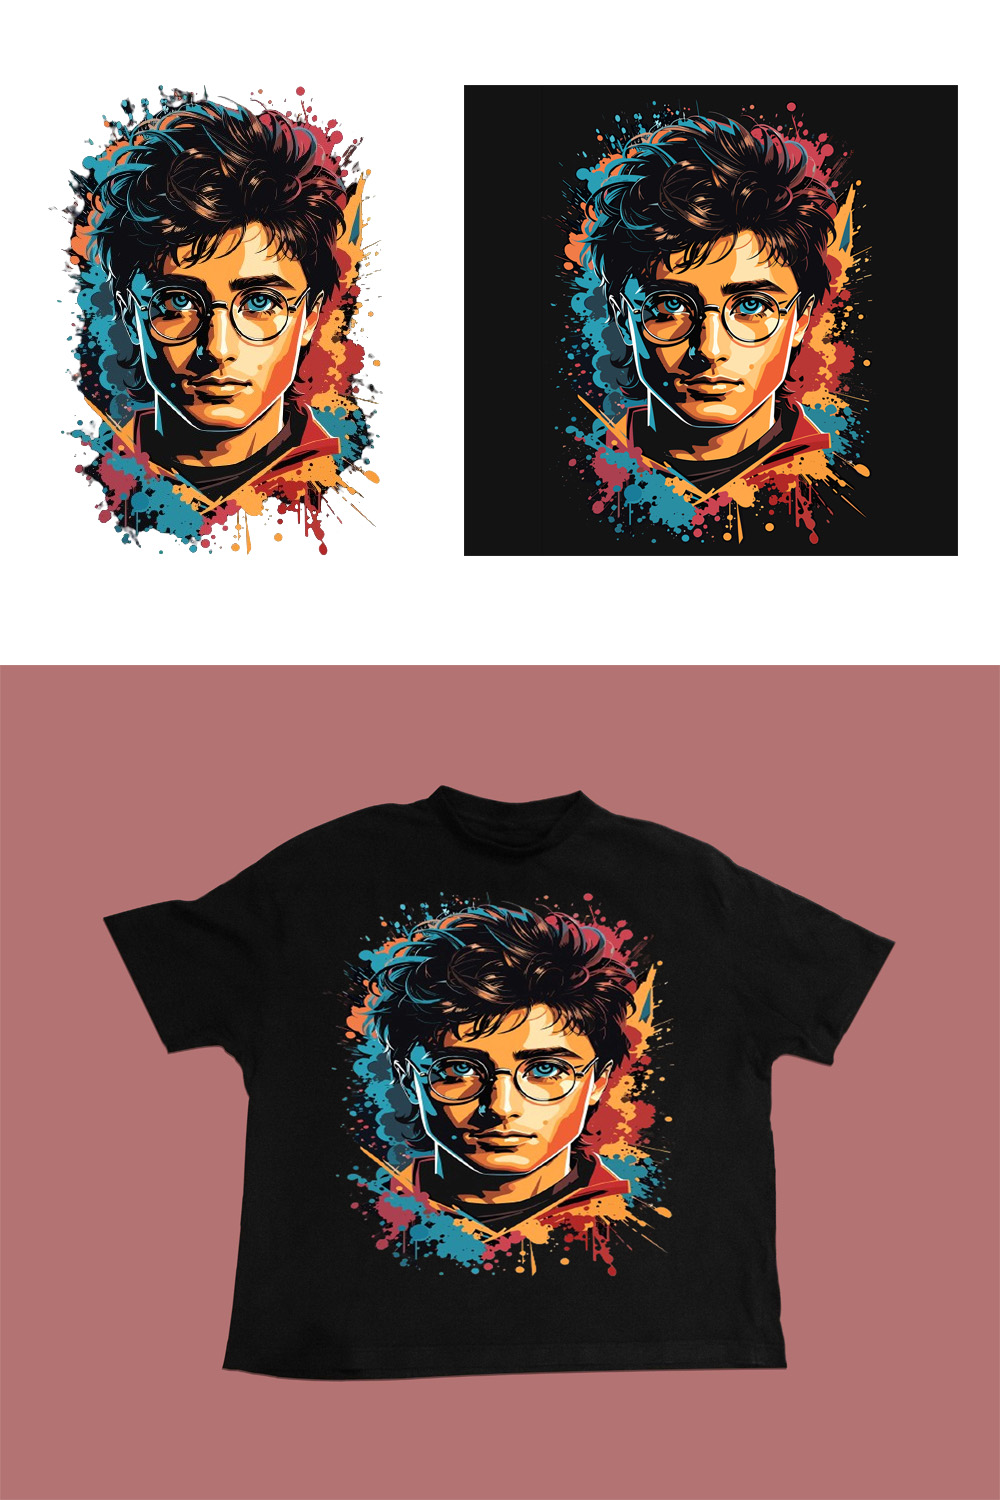 Harry Potter Graphic design t-shirt London street colorful tones highly detailed clean vector image flat design pinterest preview image.